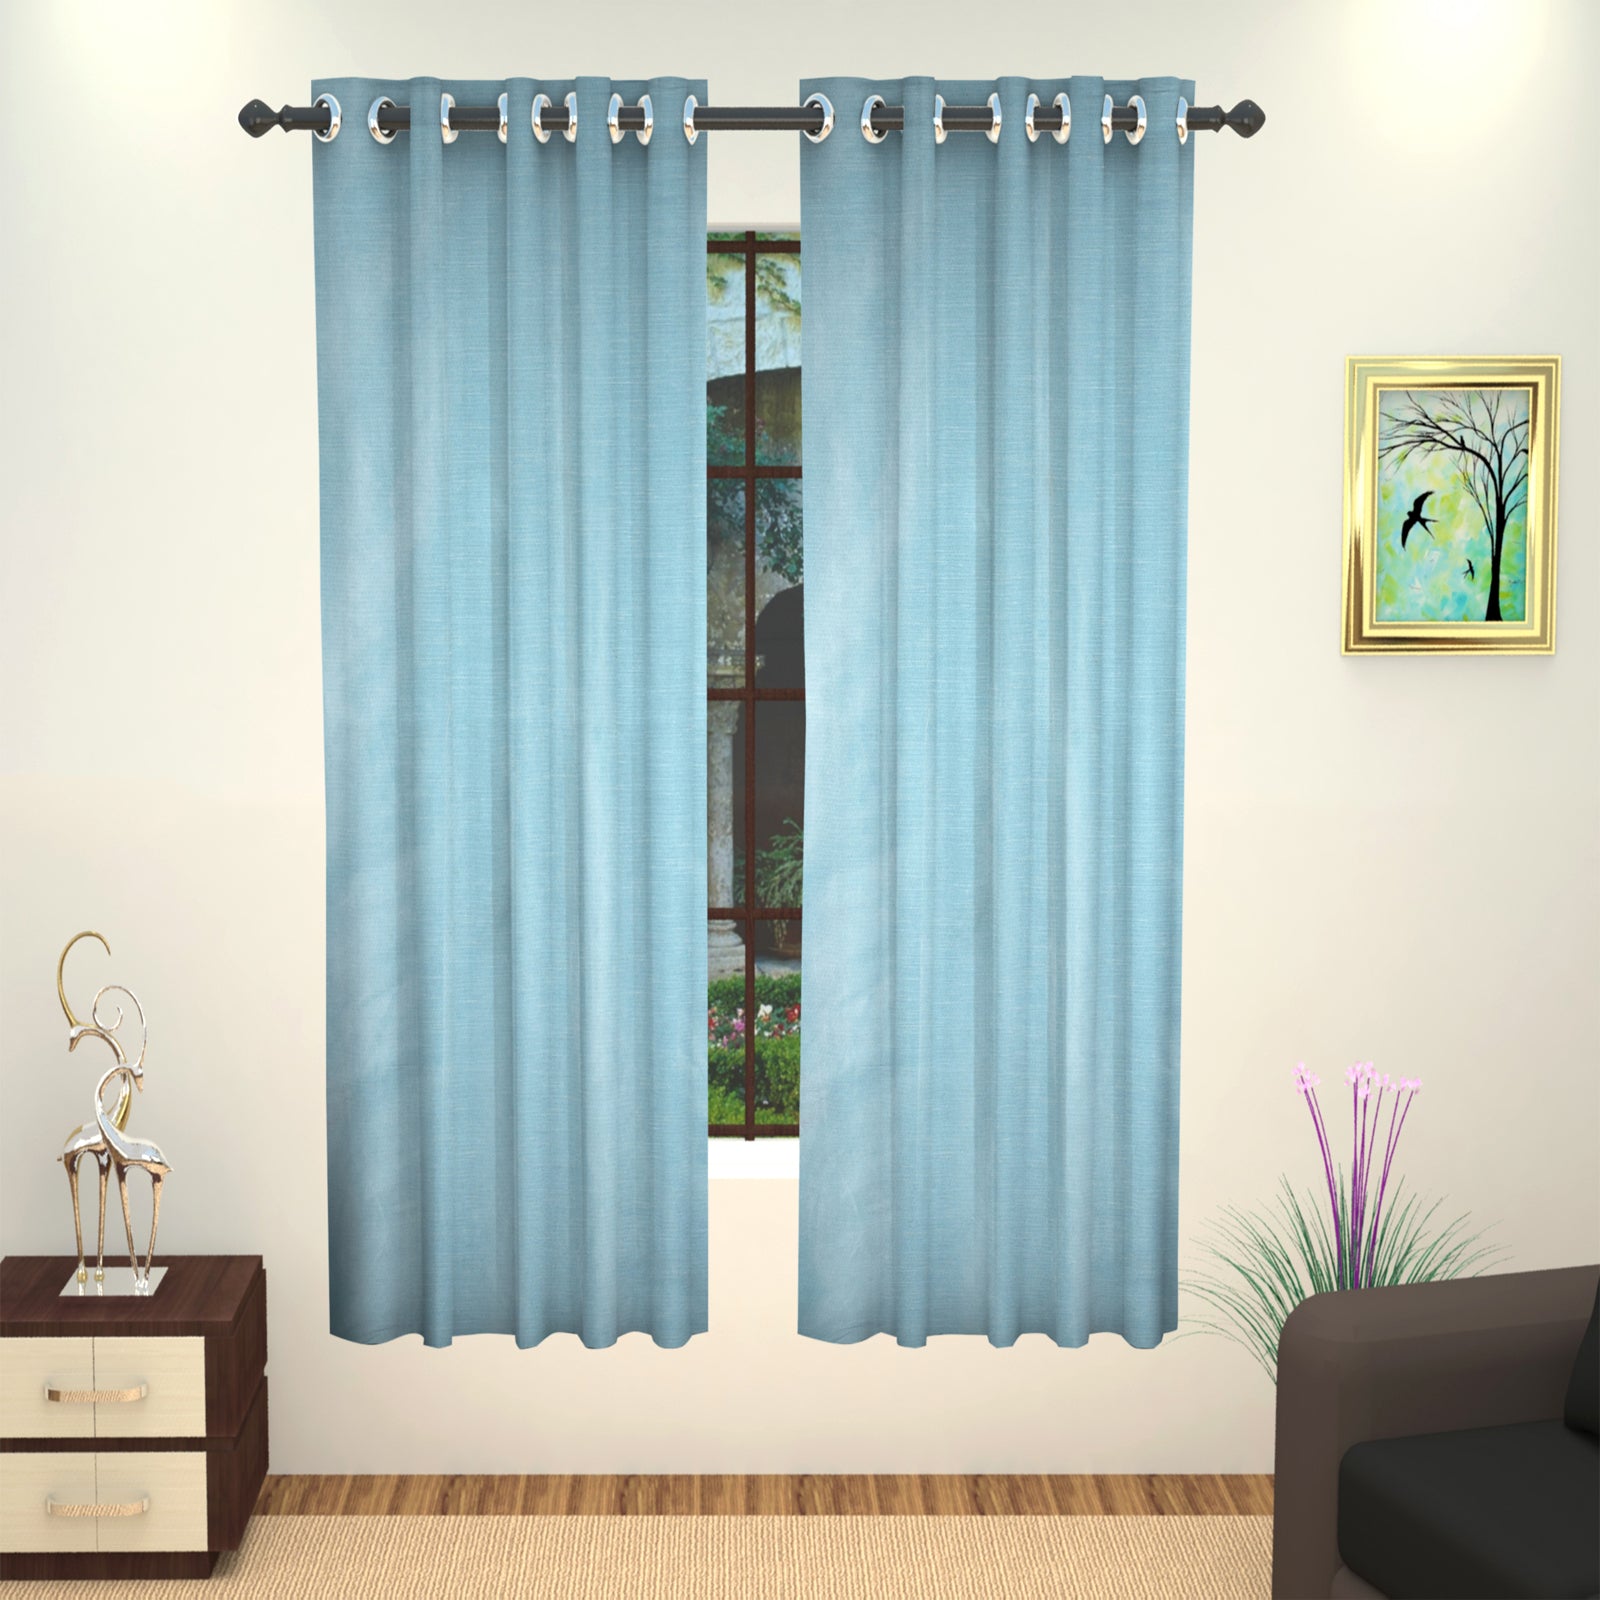 Lushomes curtain 5 Feet, curtains with lining, Blue, curtains & drapes, parda, urban space curtains, curtains for living room (Single Pc, 54 x 60 inches)